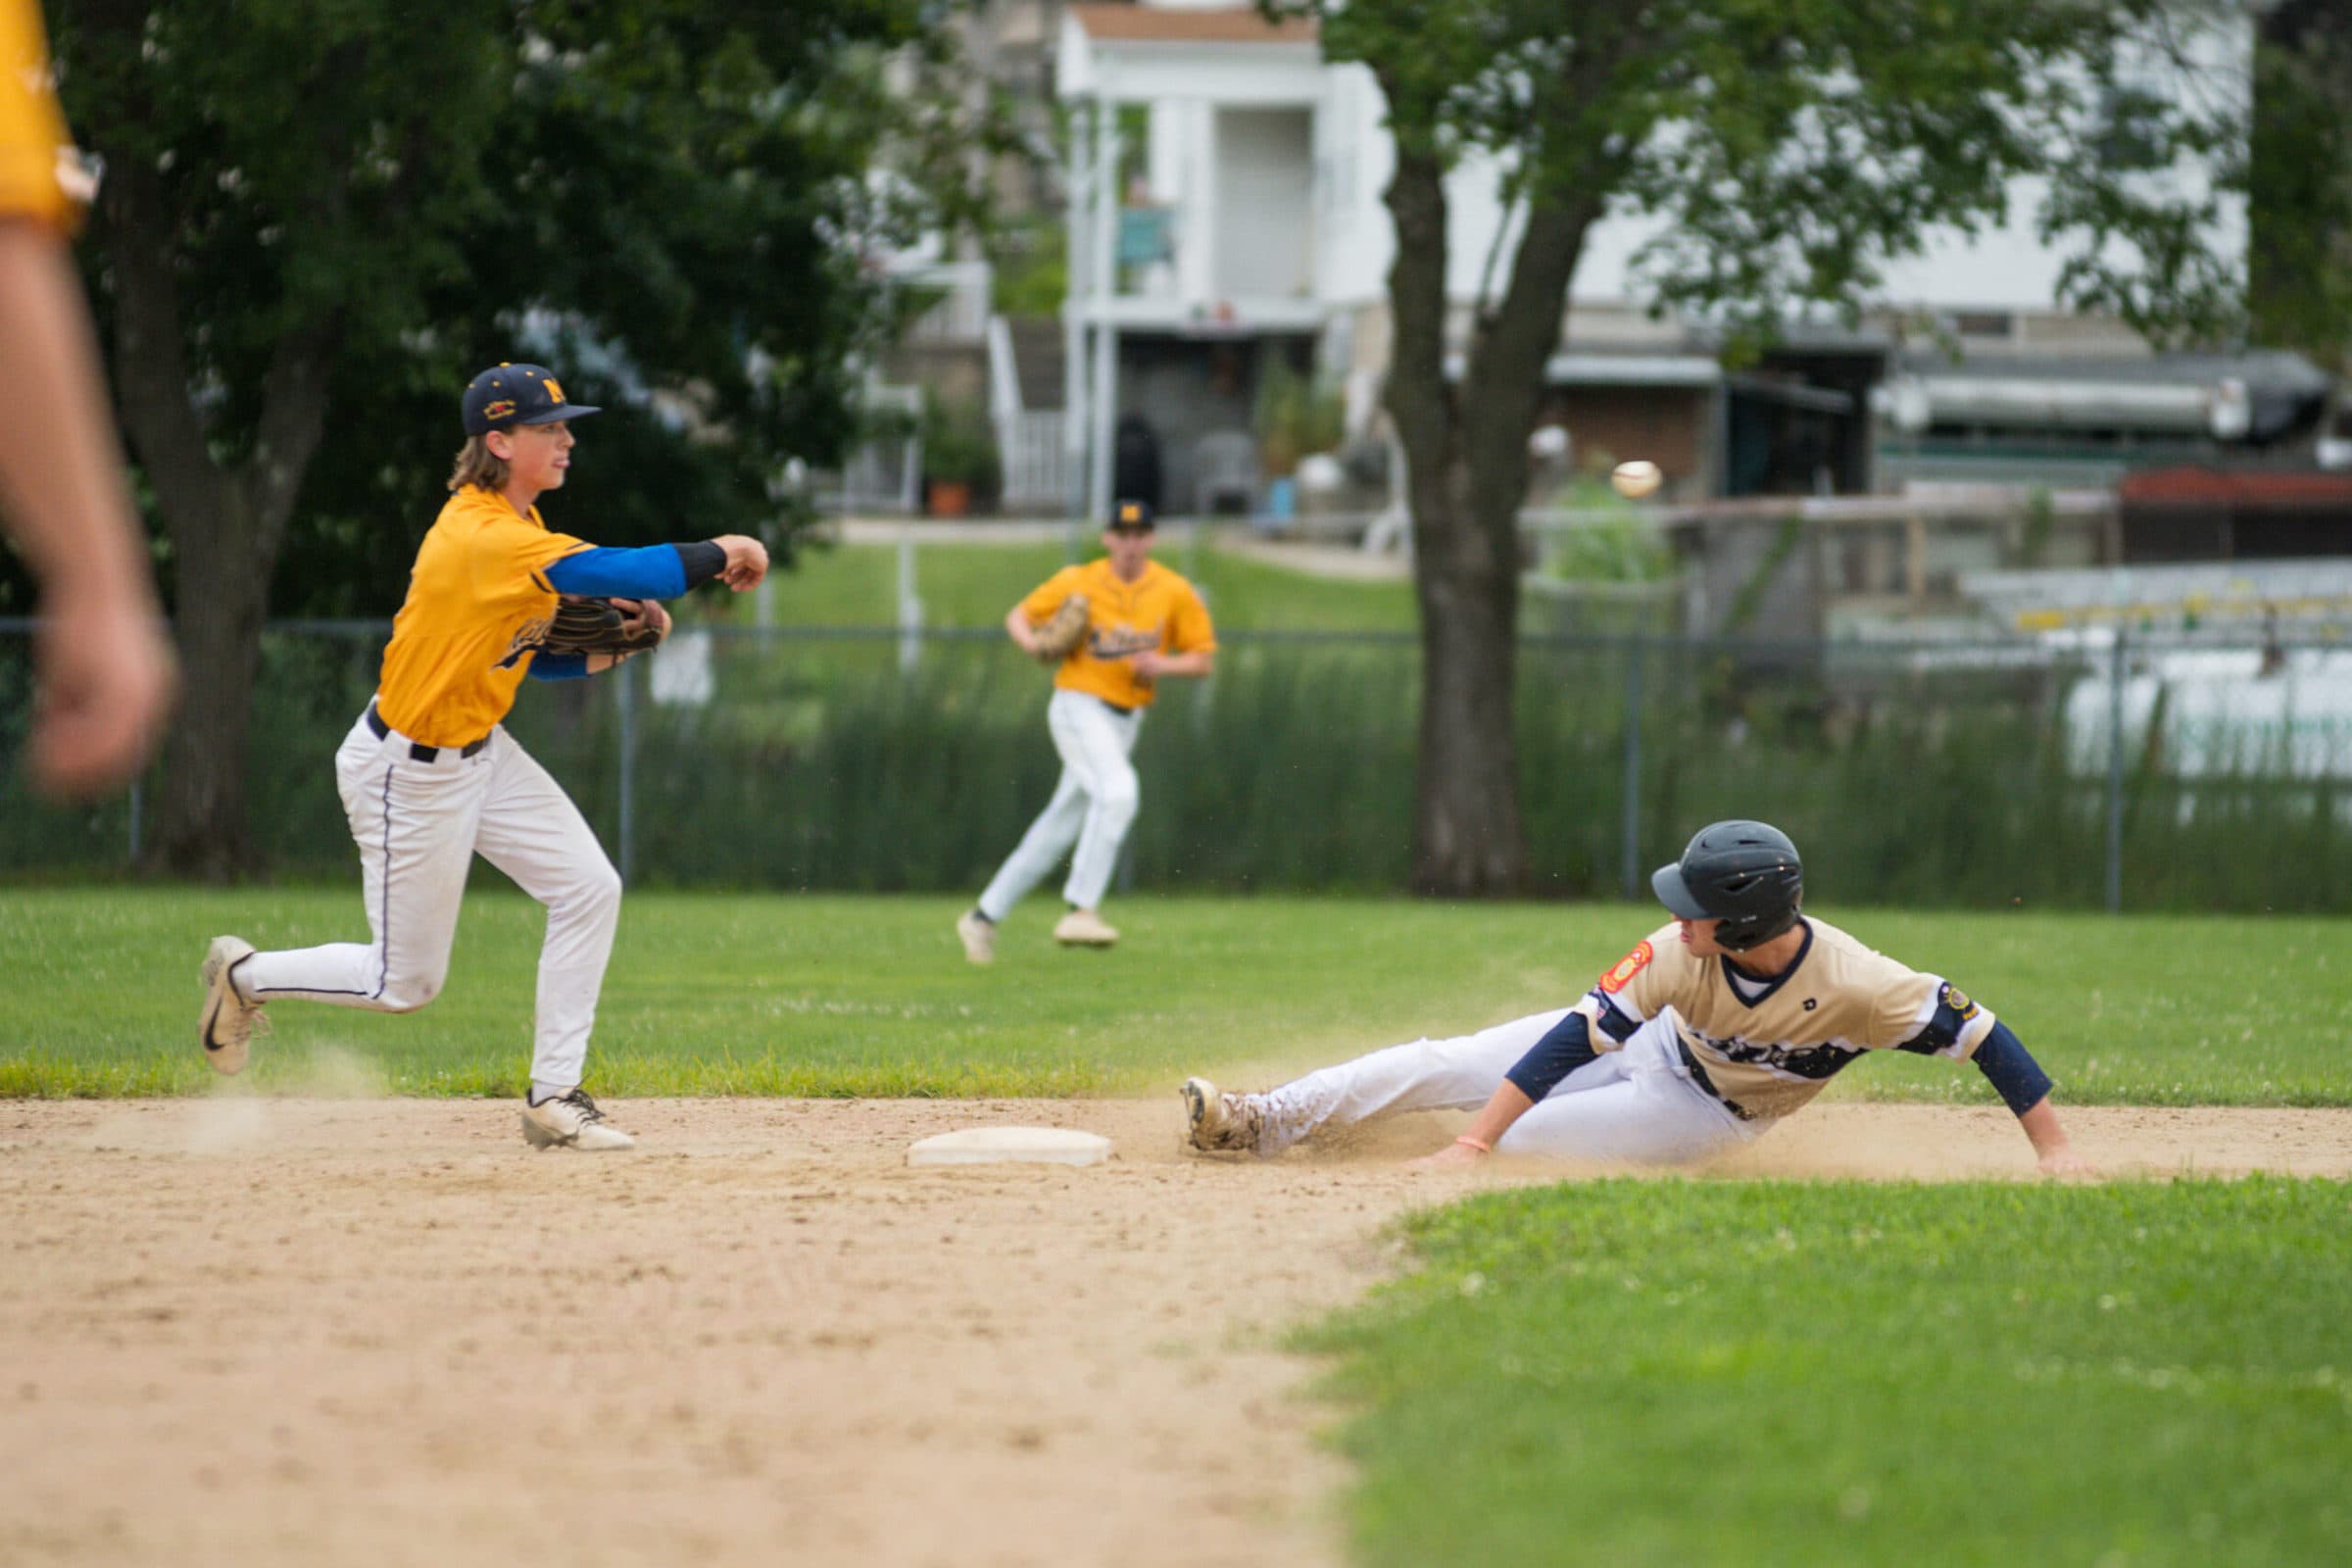 A Shrewsbury base runner slides into second base after already being tagged out by a Milford fielder. (Photo/Jesse Kucewicz)